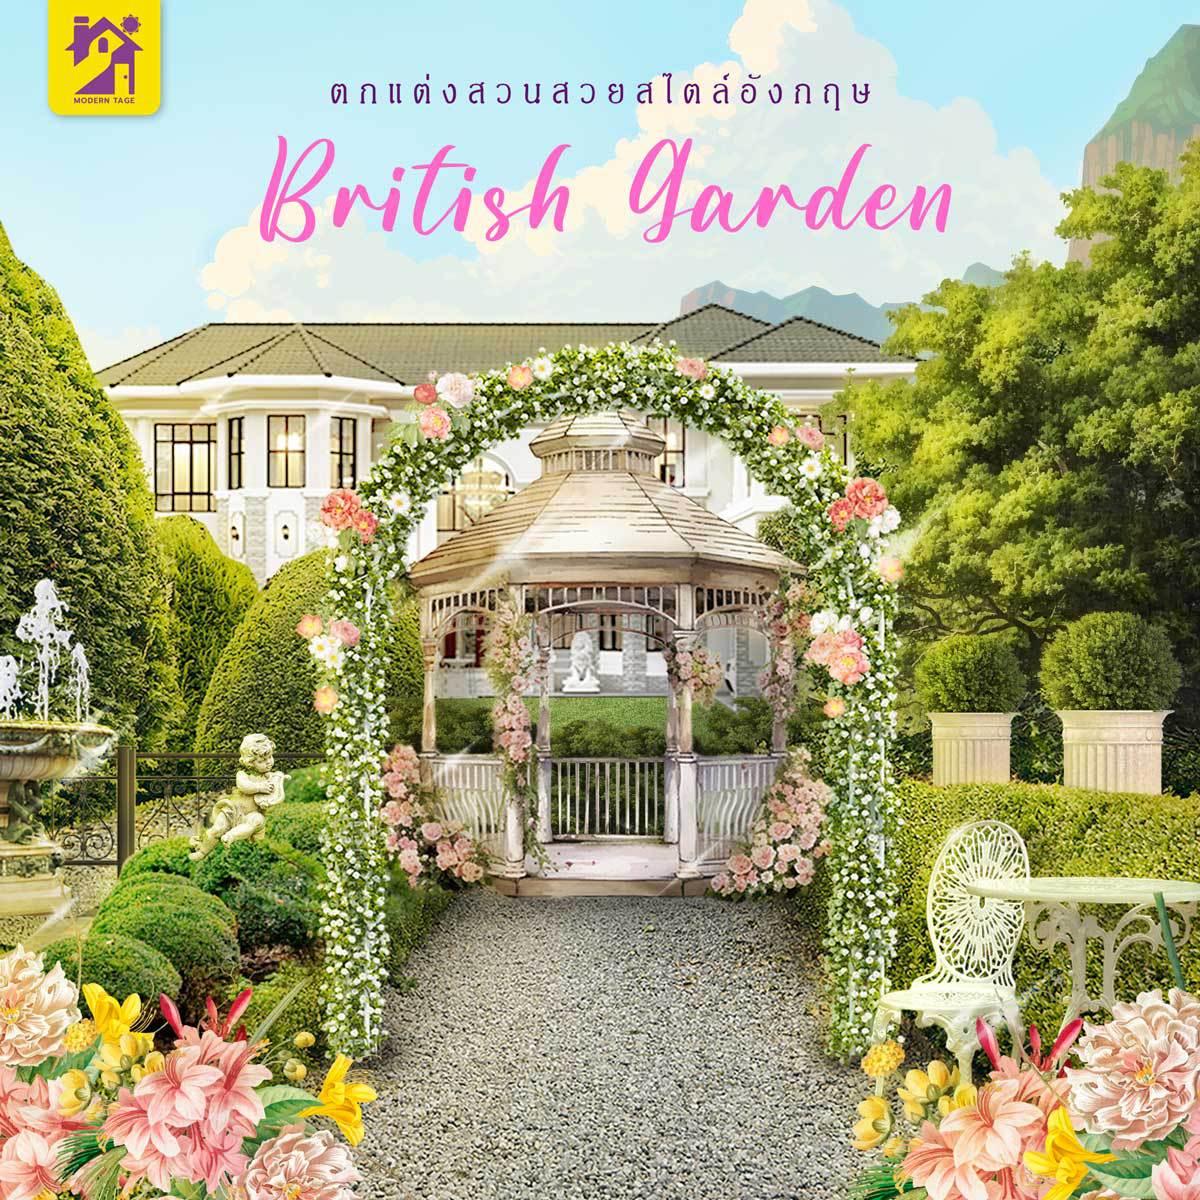 8 Design tips for your home British garden